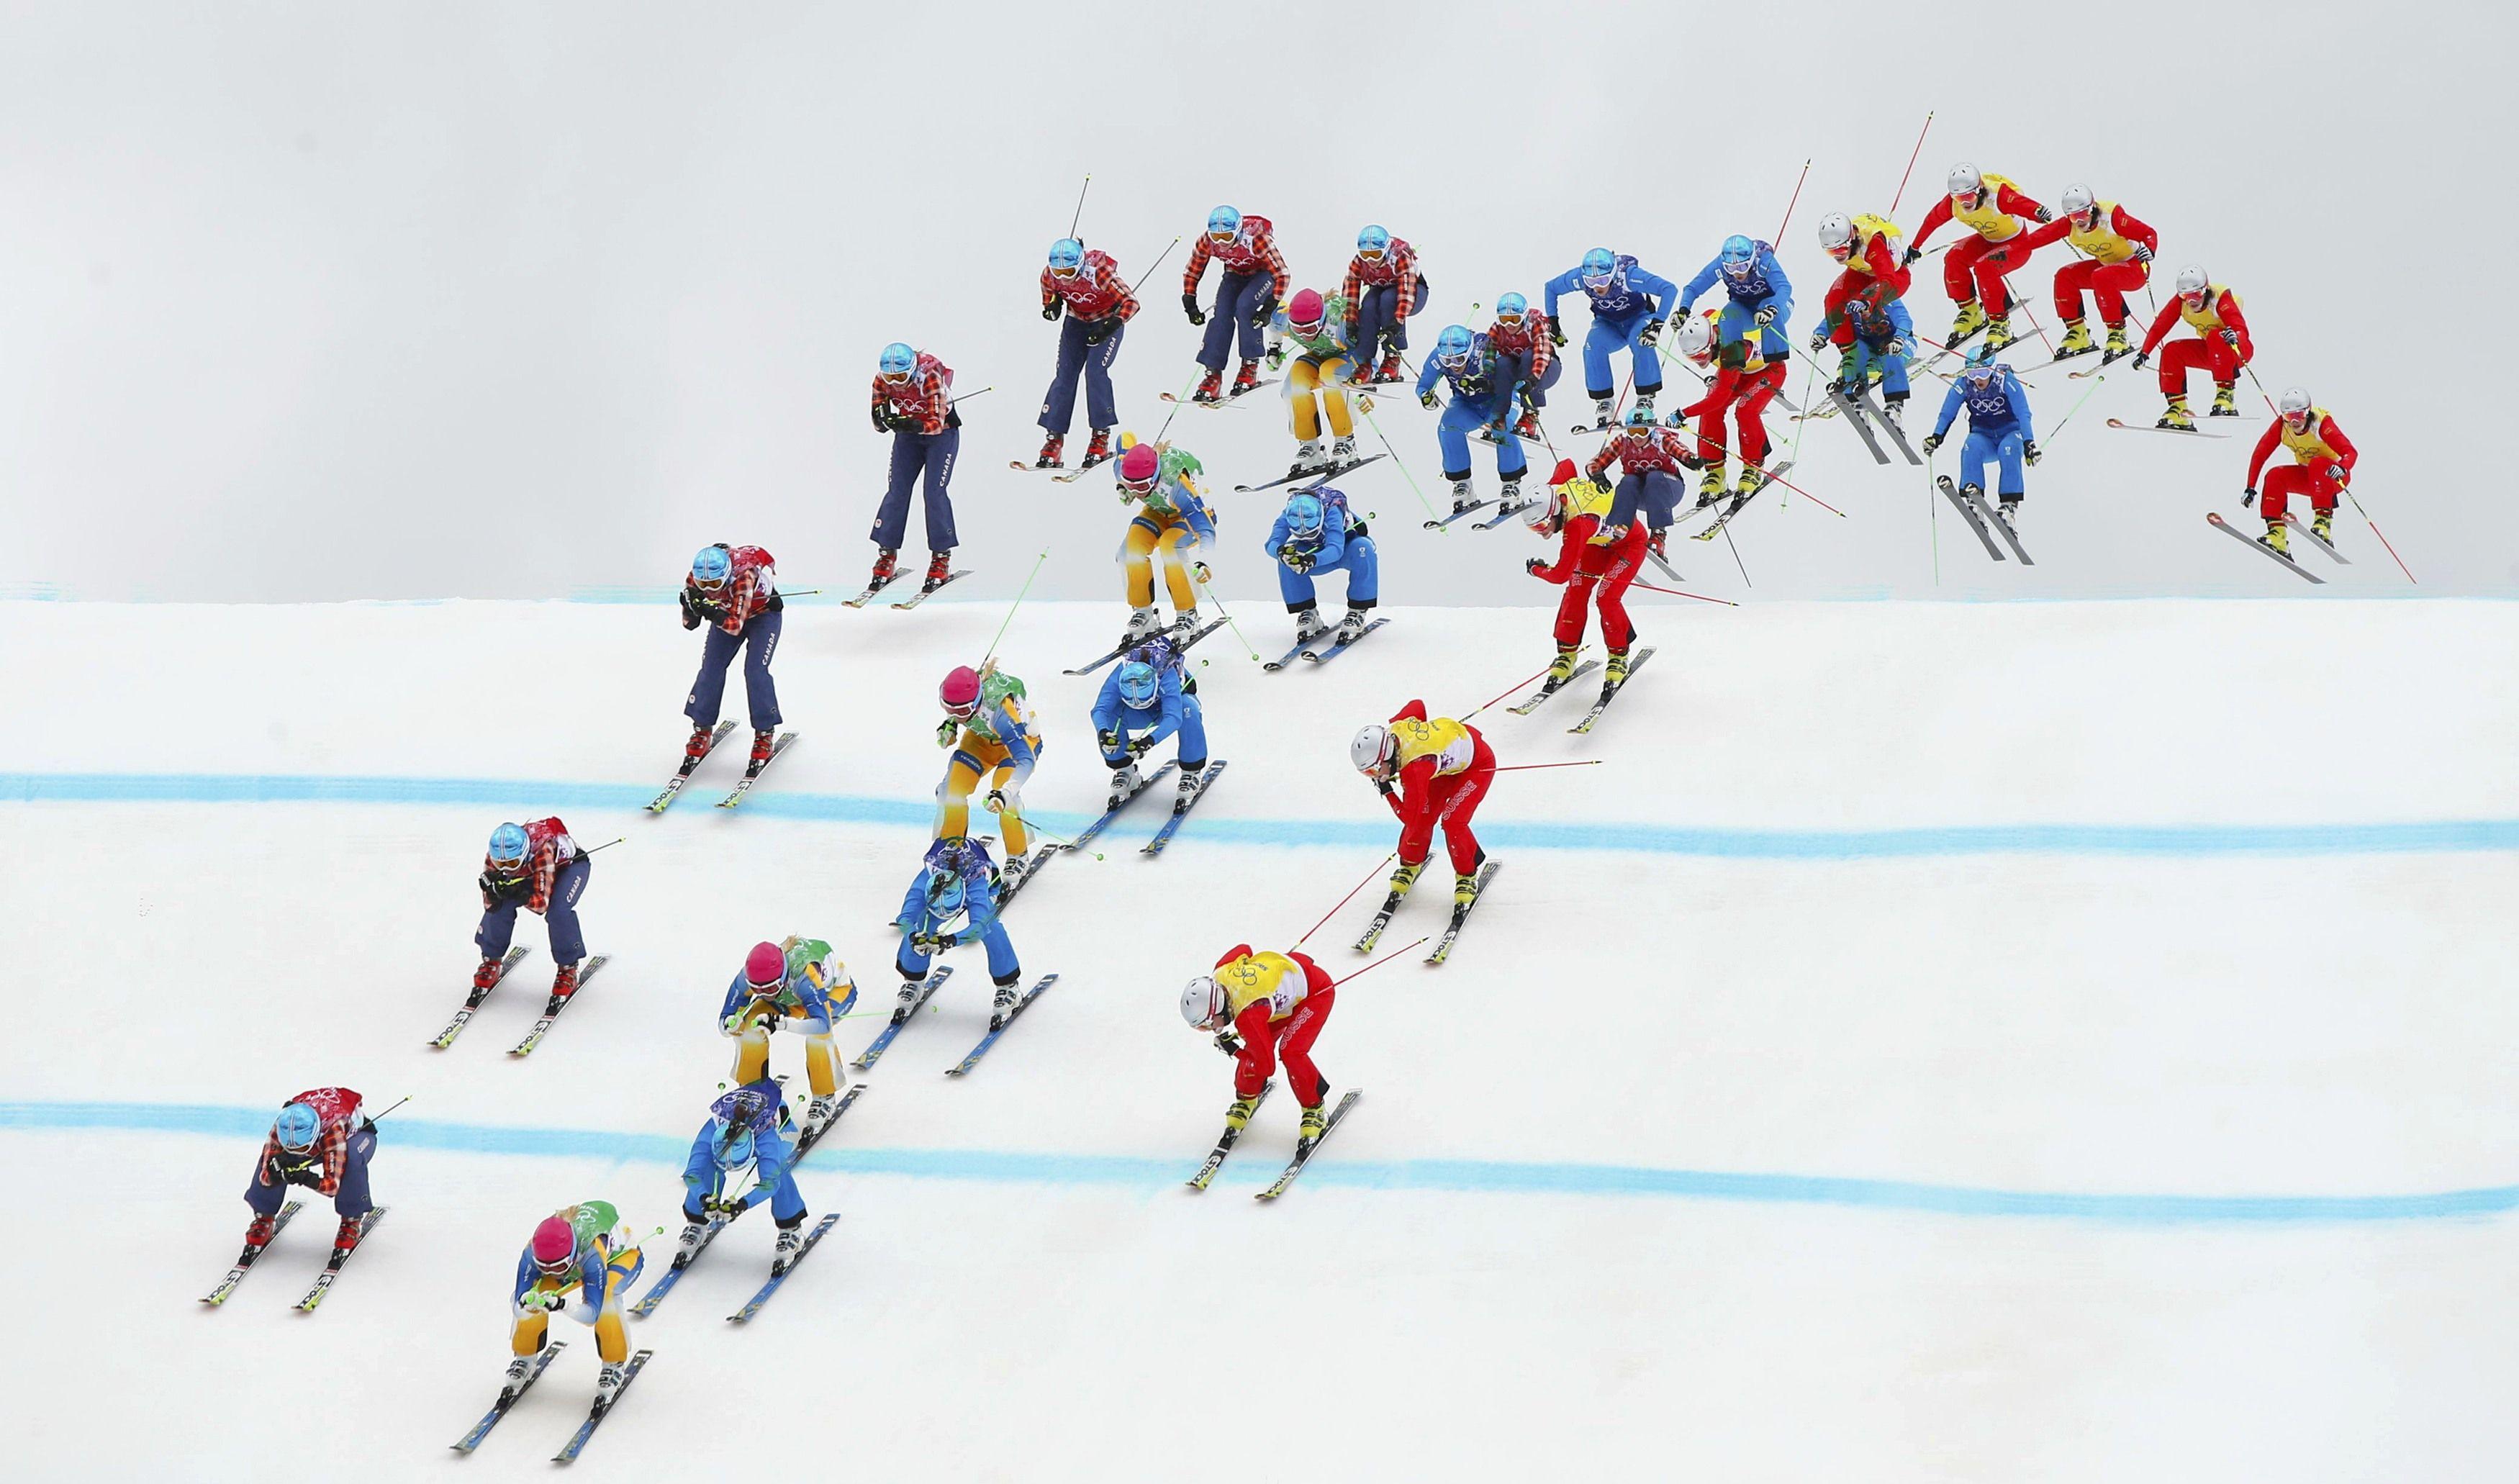 Winter Olympics wallpaper, Sports, HQ Winter Olympics picture